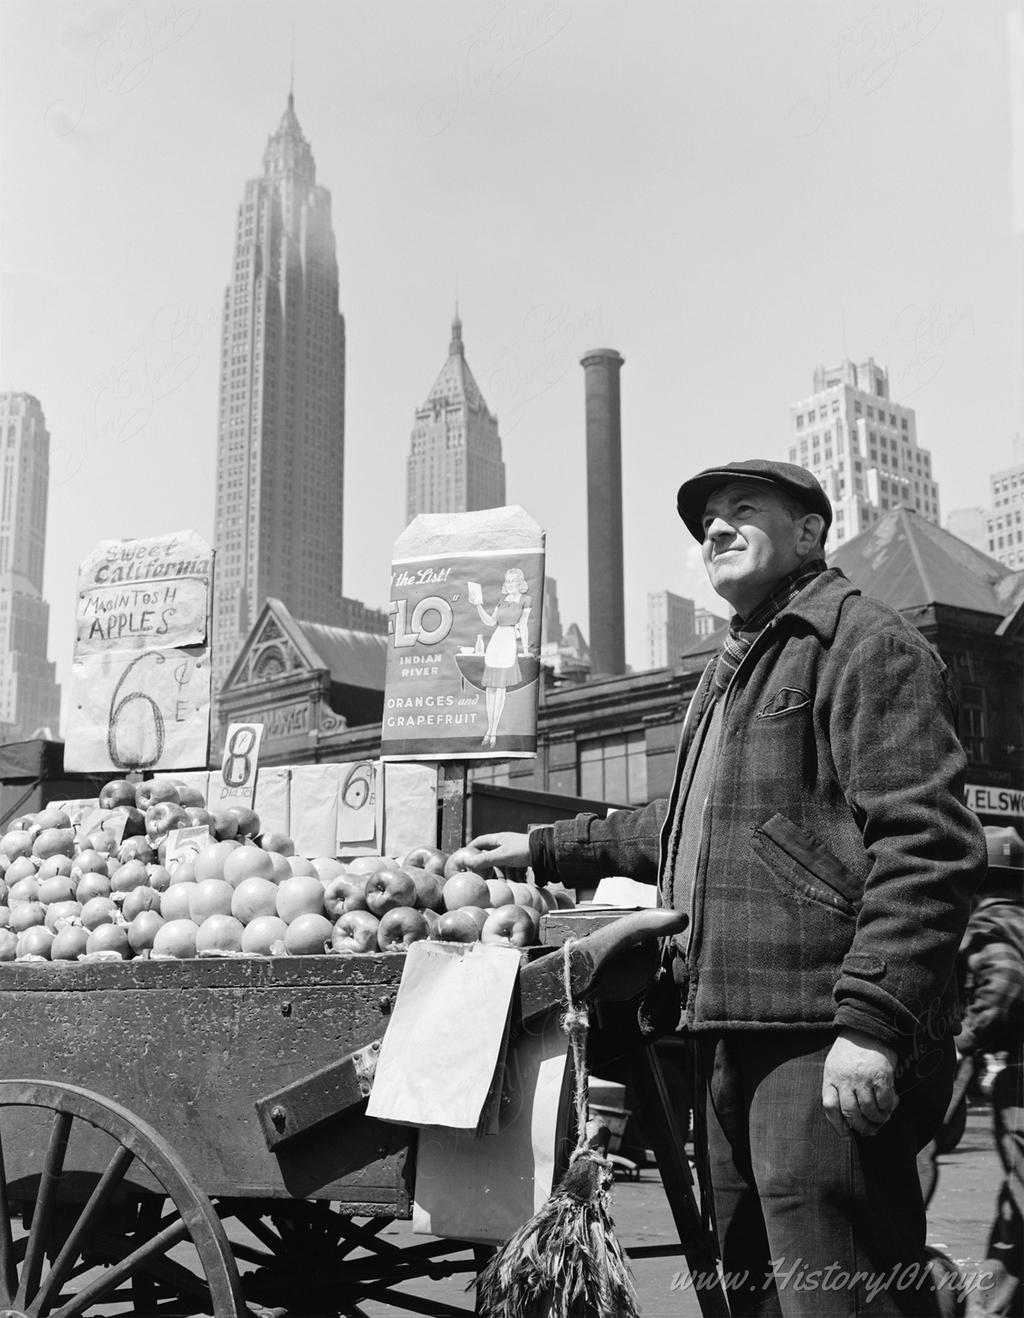 Photograph of a pushcart fruit vendor at Fulton Fish Market with downtown Manhattan skyscrapers visible in the background.